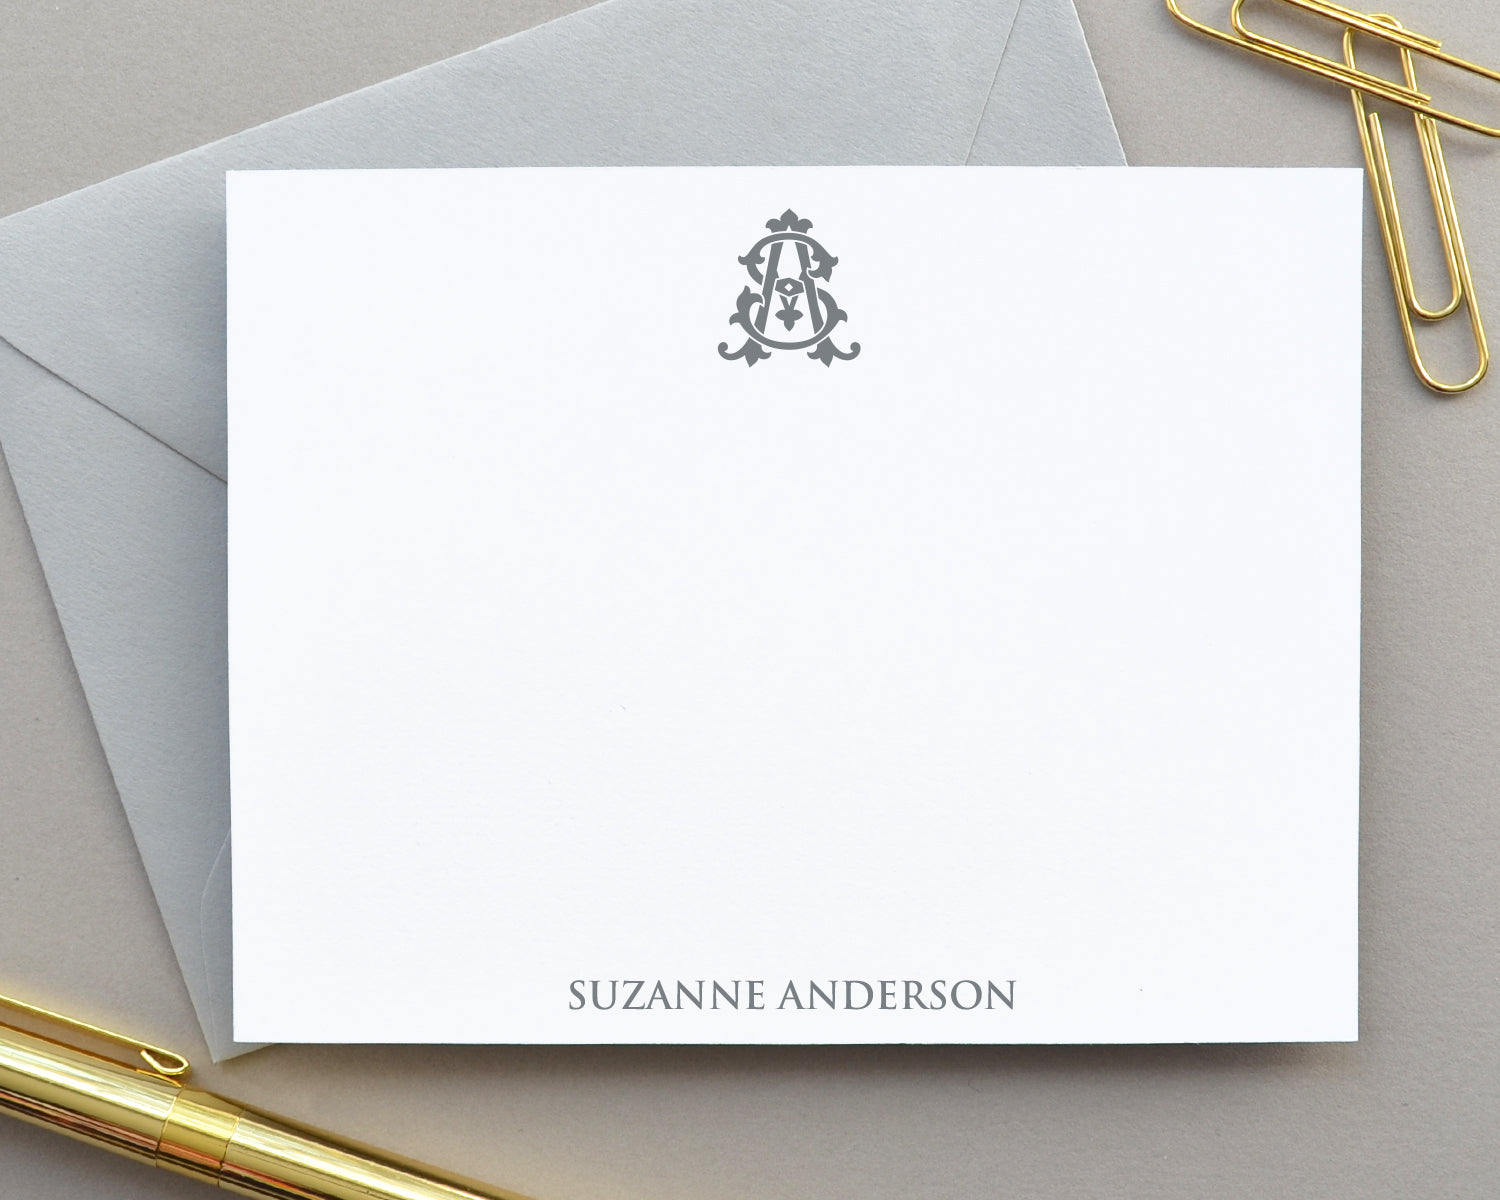 Gold Foil Letter S Personalized Blank Note Cards with Envelopes 4x6,  Initial S Monogrammed Stationery Set (Ivory, 24 Pack) in Dubai - UAE